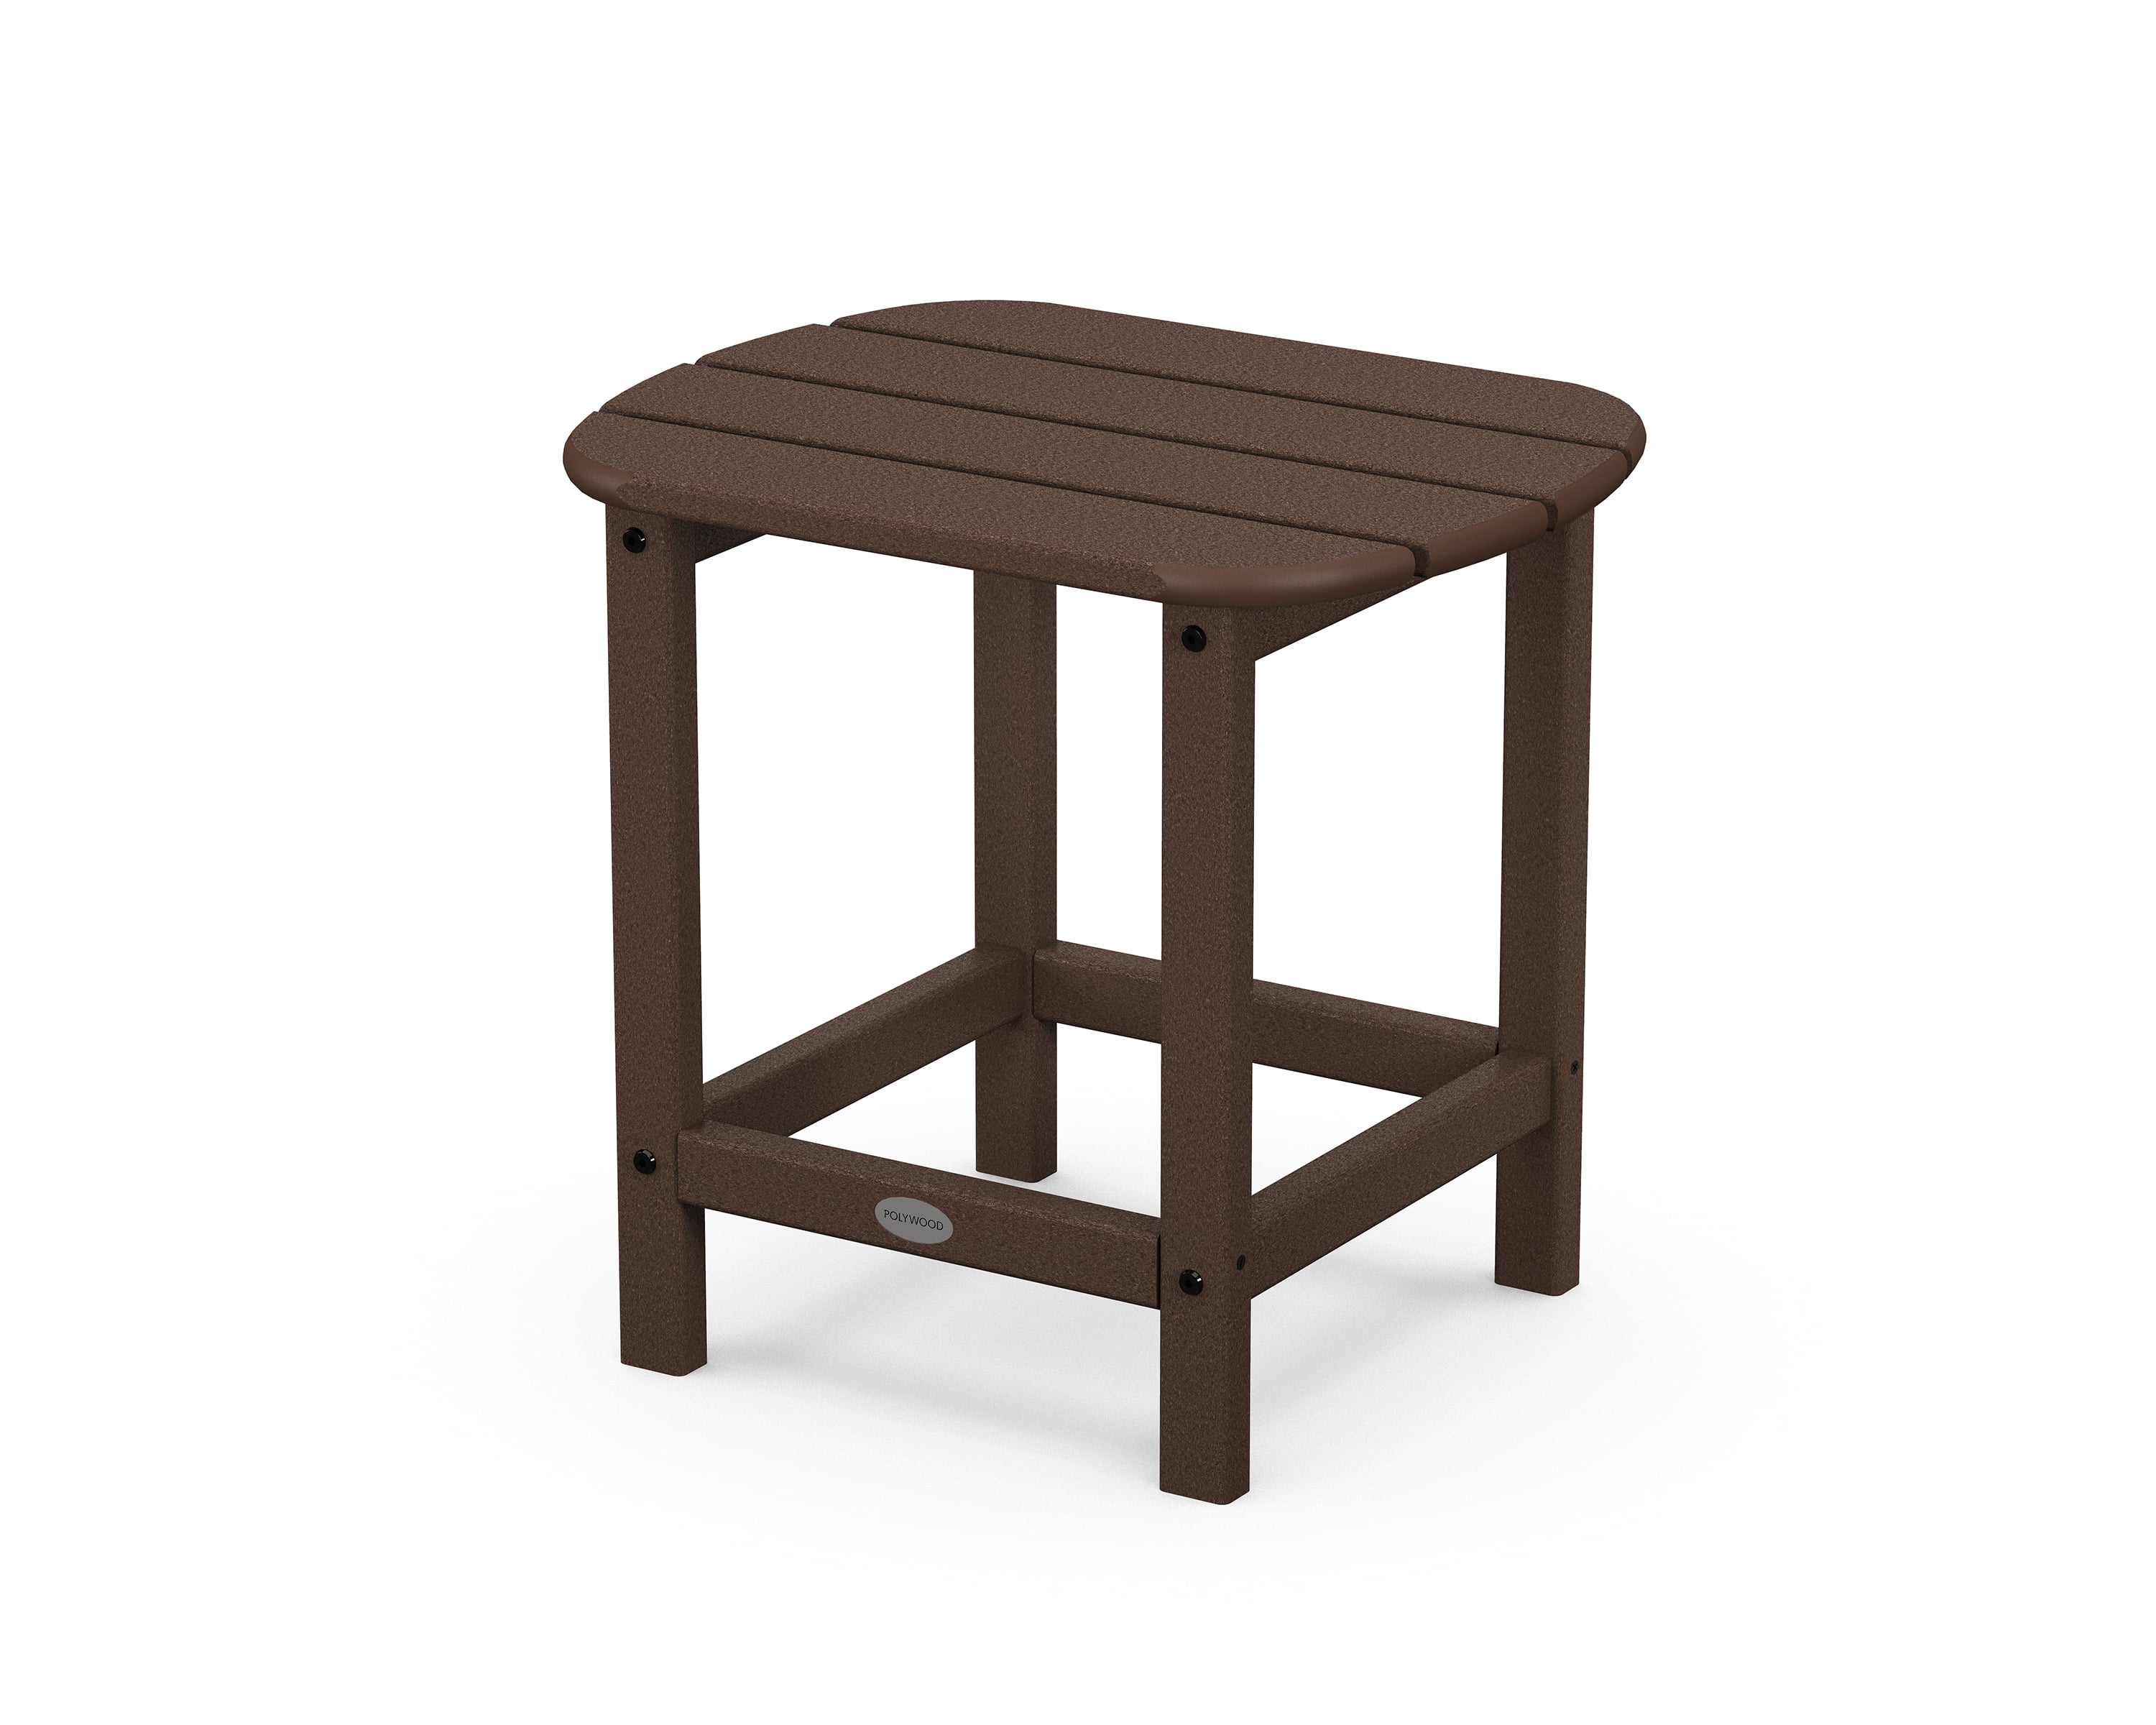 GDF Studio 301561 Breeze Outdoor 15 Teal Iron Side Table 